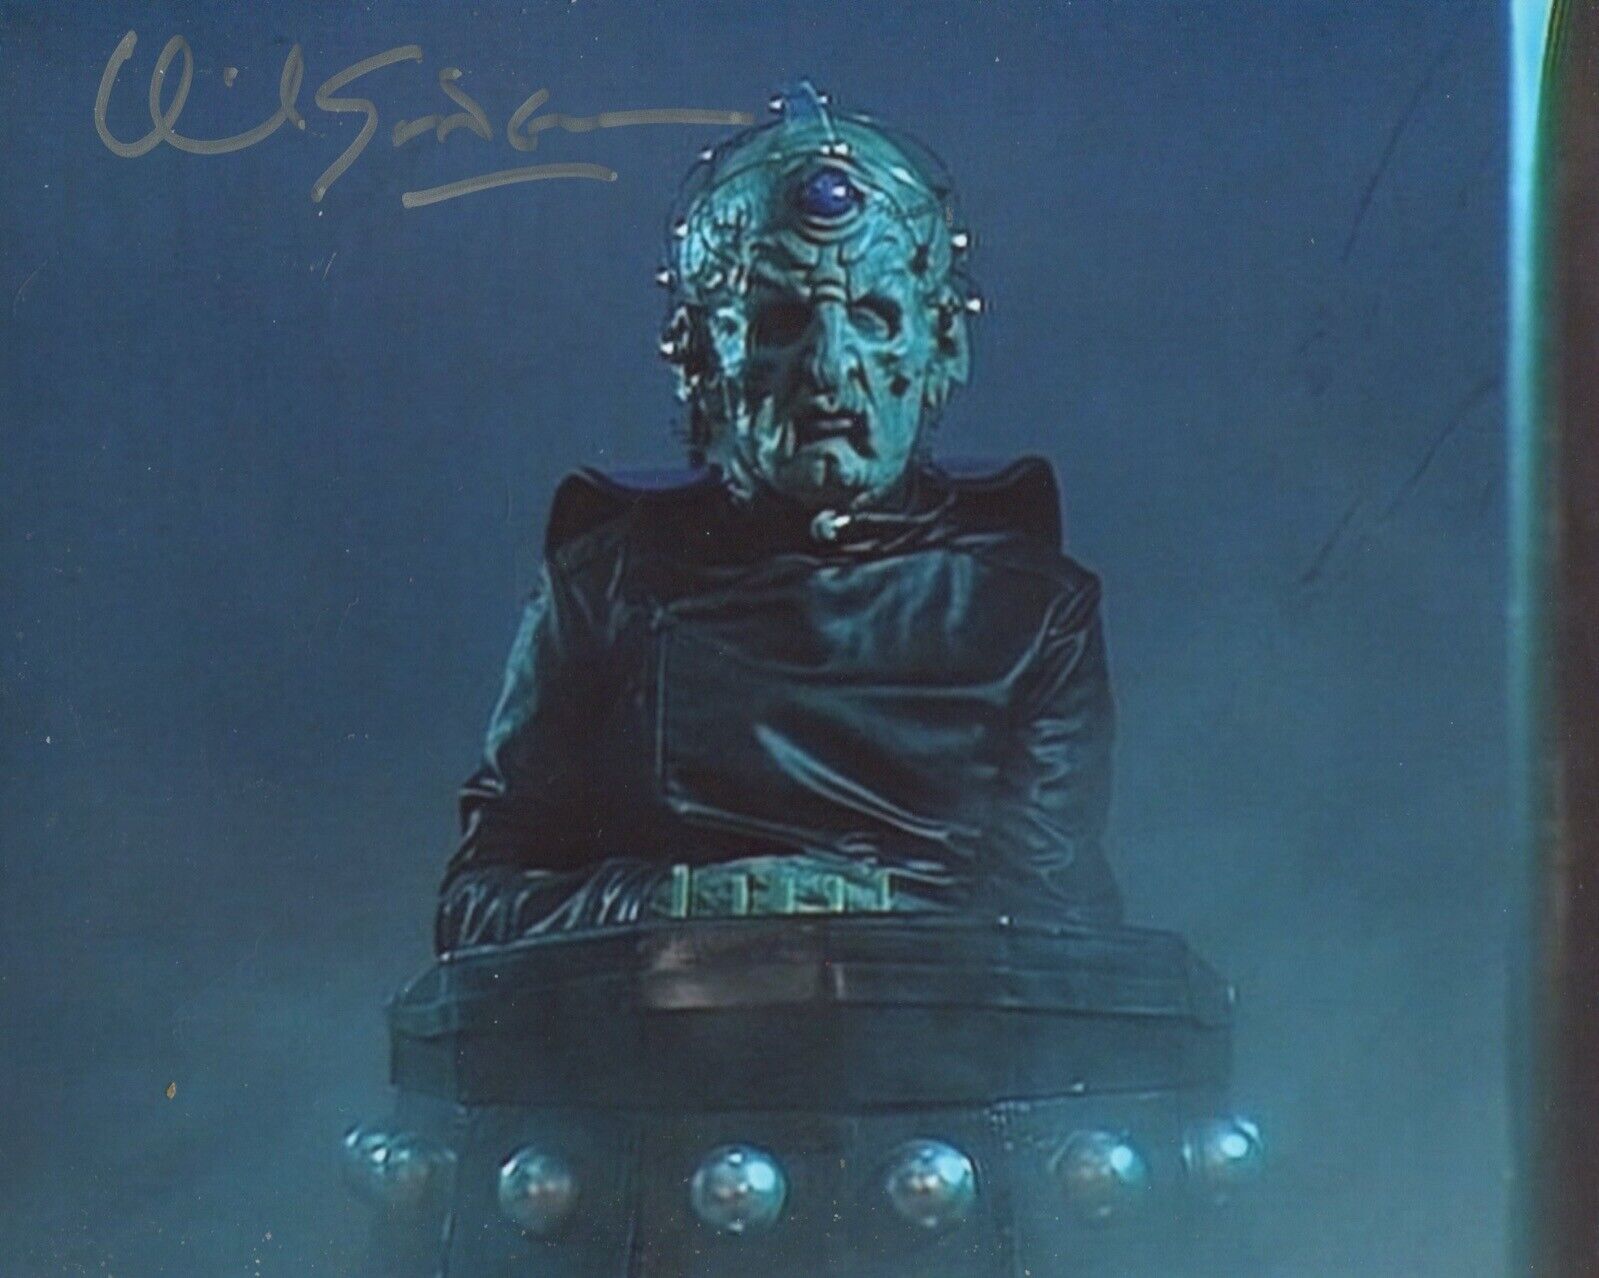 Doctor Who Daleks commander Davros photo signed by David Gooderson10x 8 inch colour picture. All